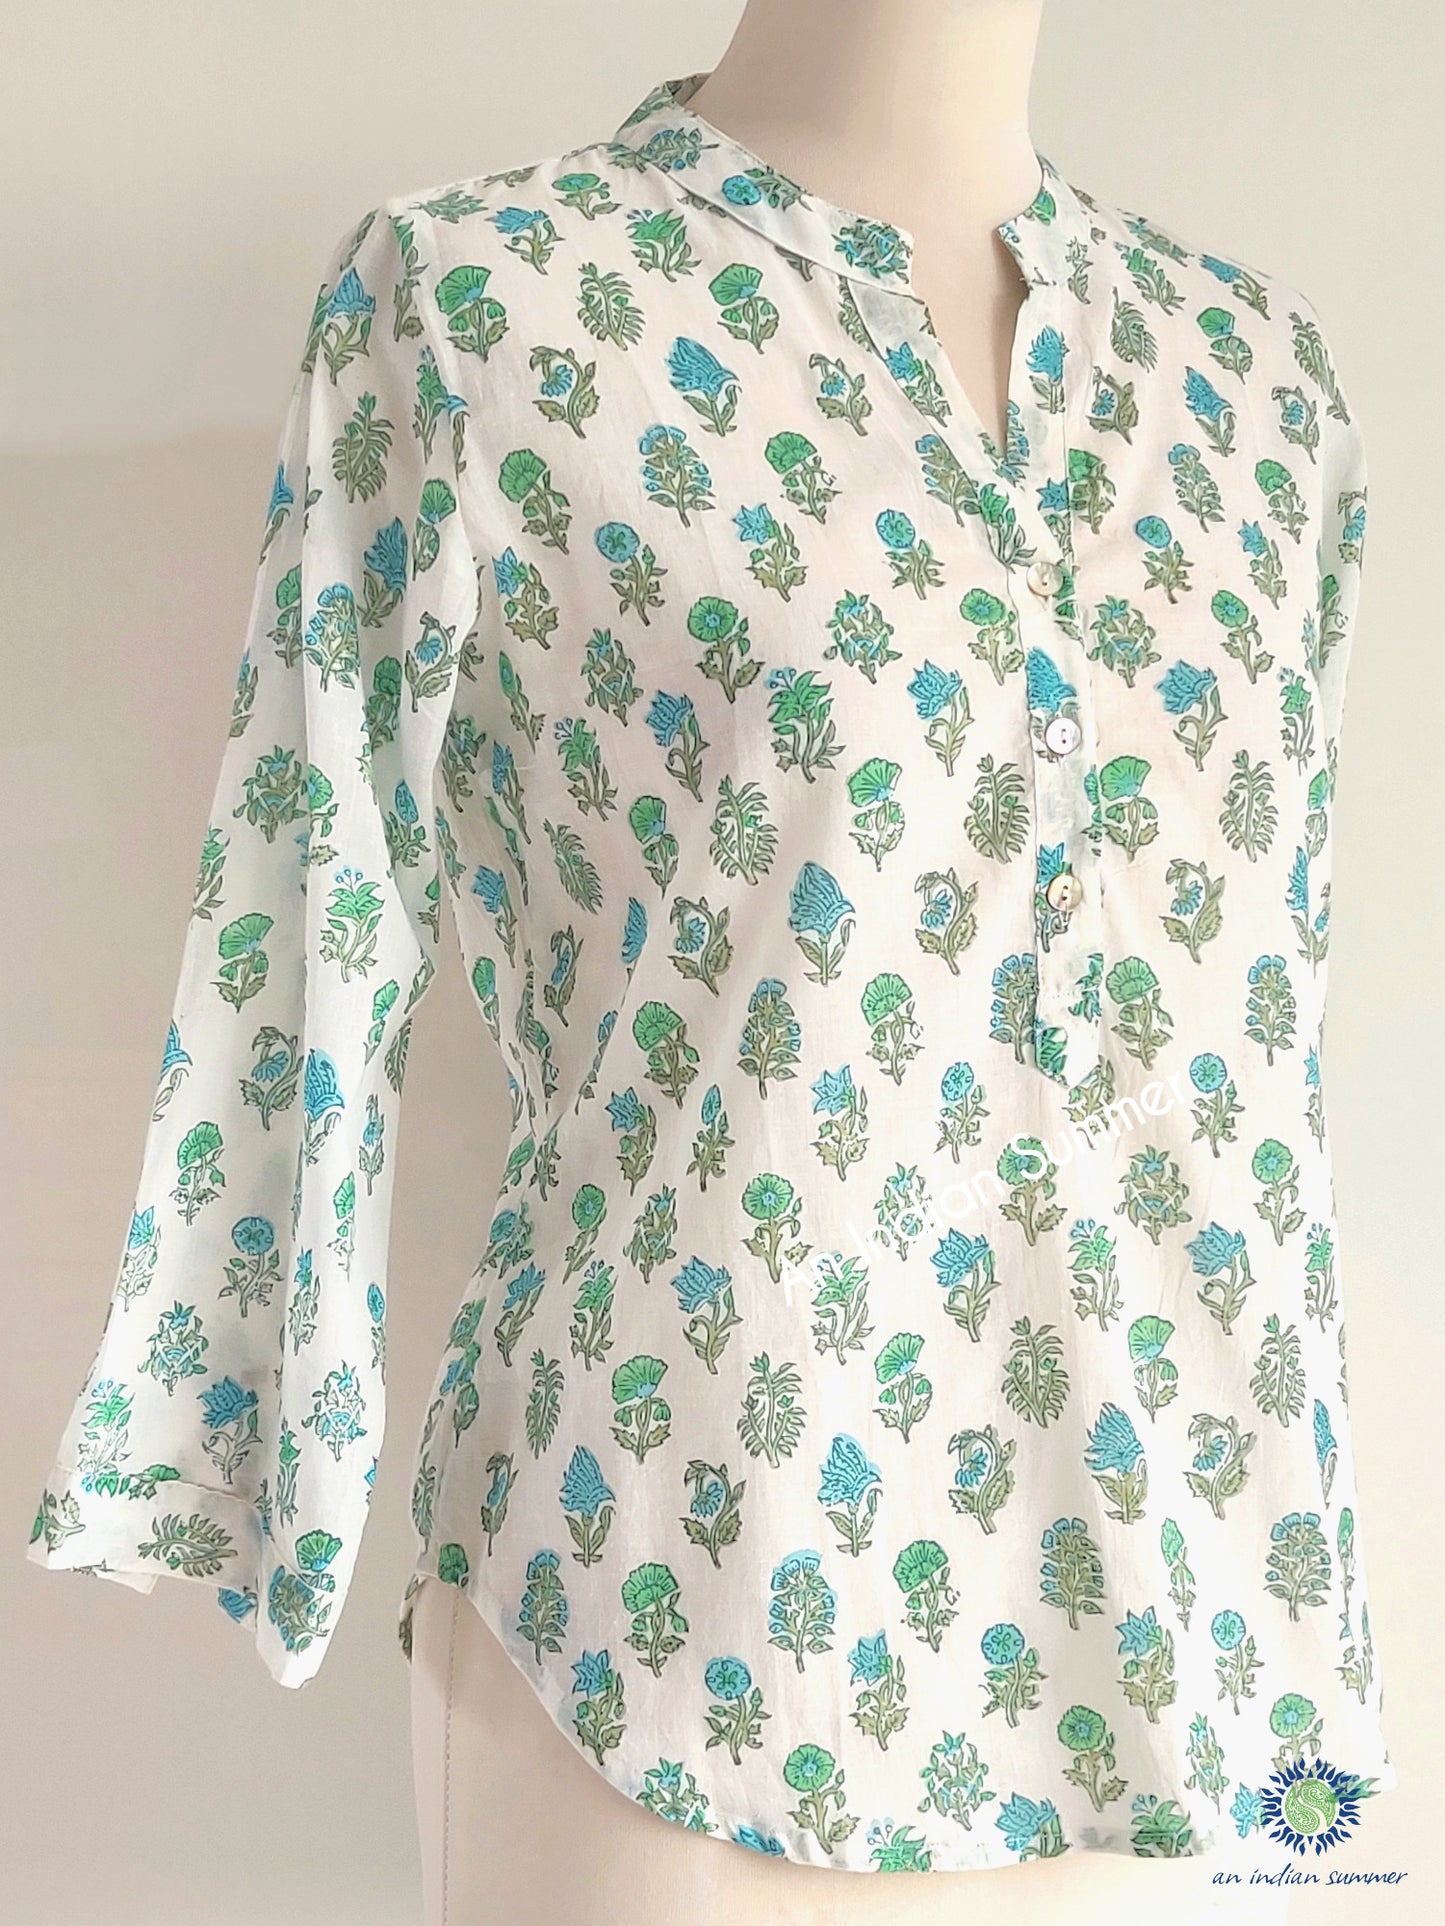 Pippa Top Jade | Mughal Floral Block Print | Hand Block Printed | Cotton Voile | An Indian Summer | Seasonless Timeless Sustainable Ethical Authentic Artisan Conscious Clothing Lifestyle Brand